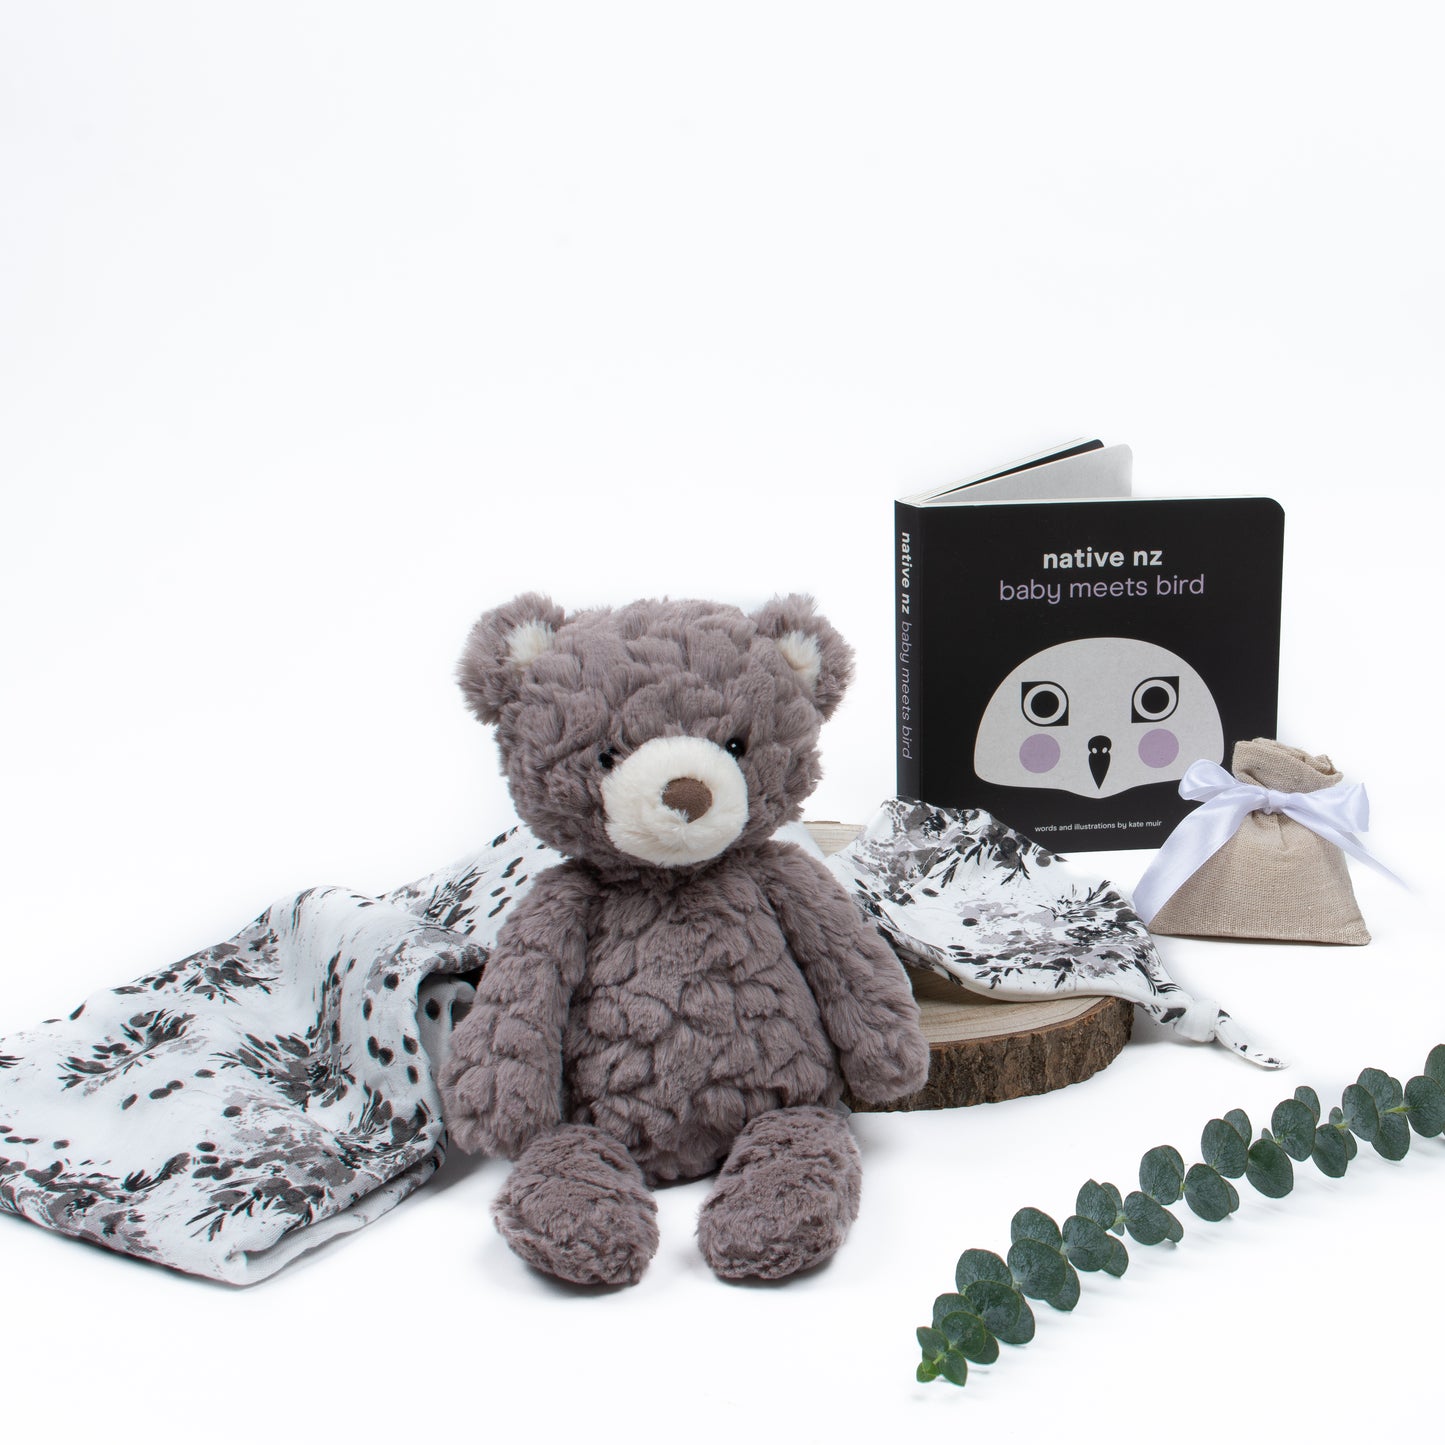 Flatlay of products out of gift box are swaddle and knot hat, soft toy, book, lavender pouch.